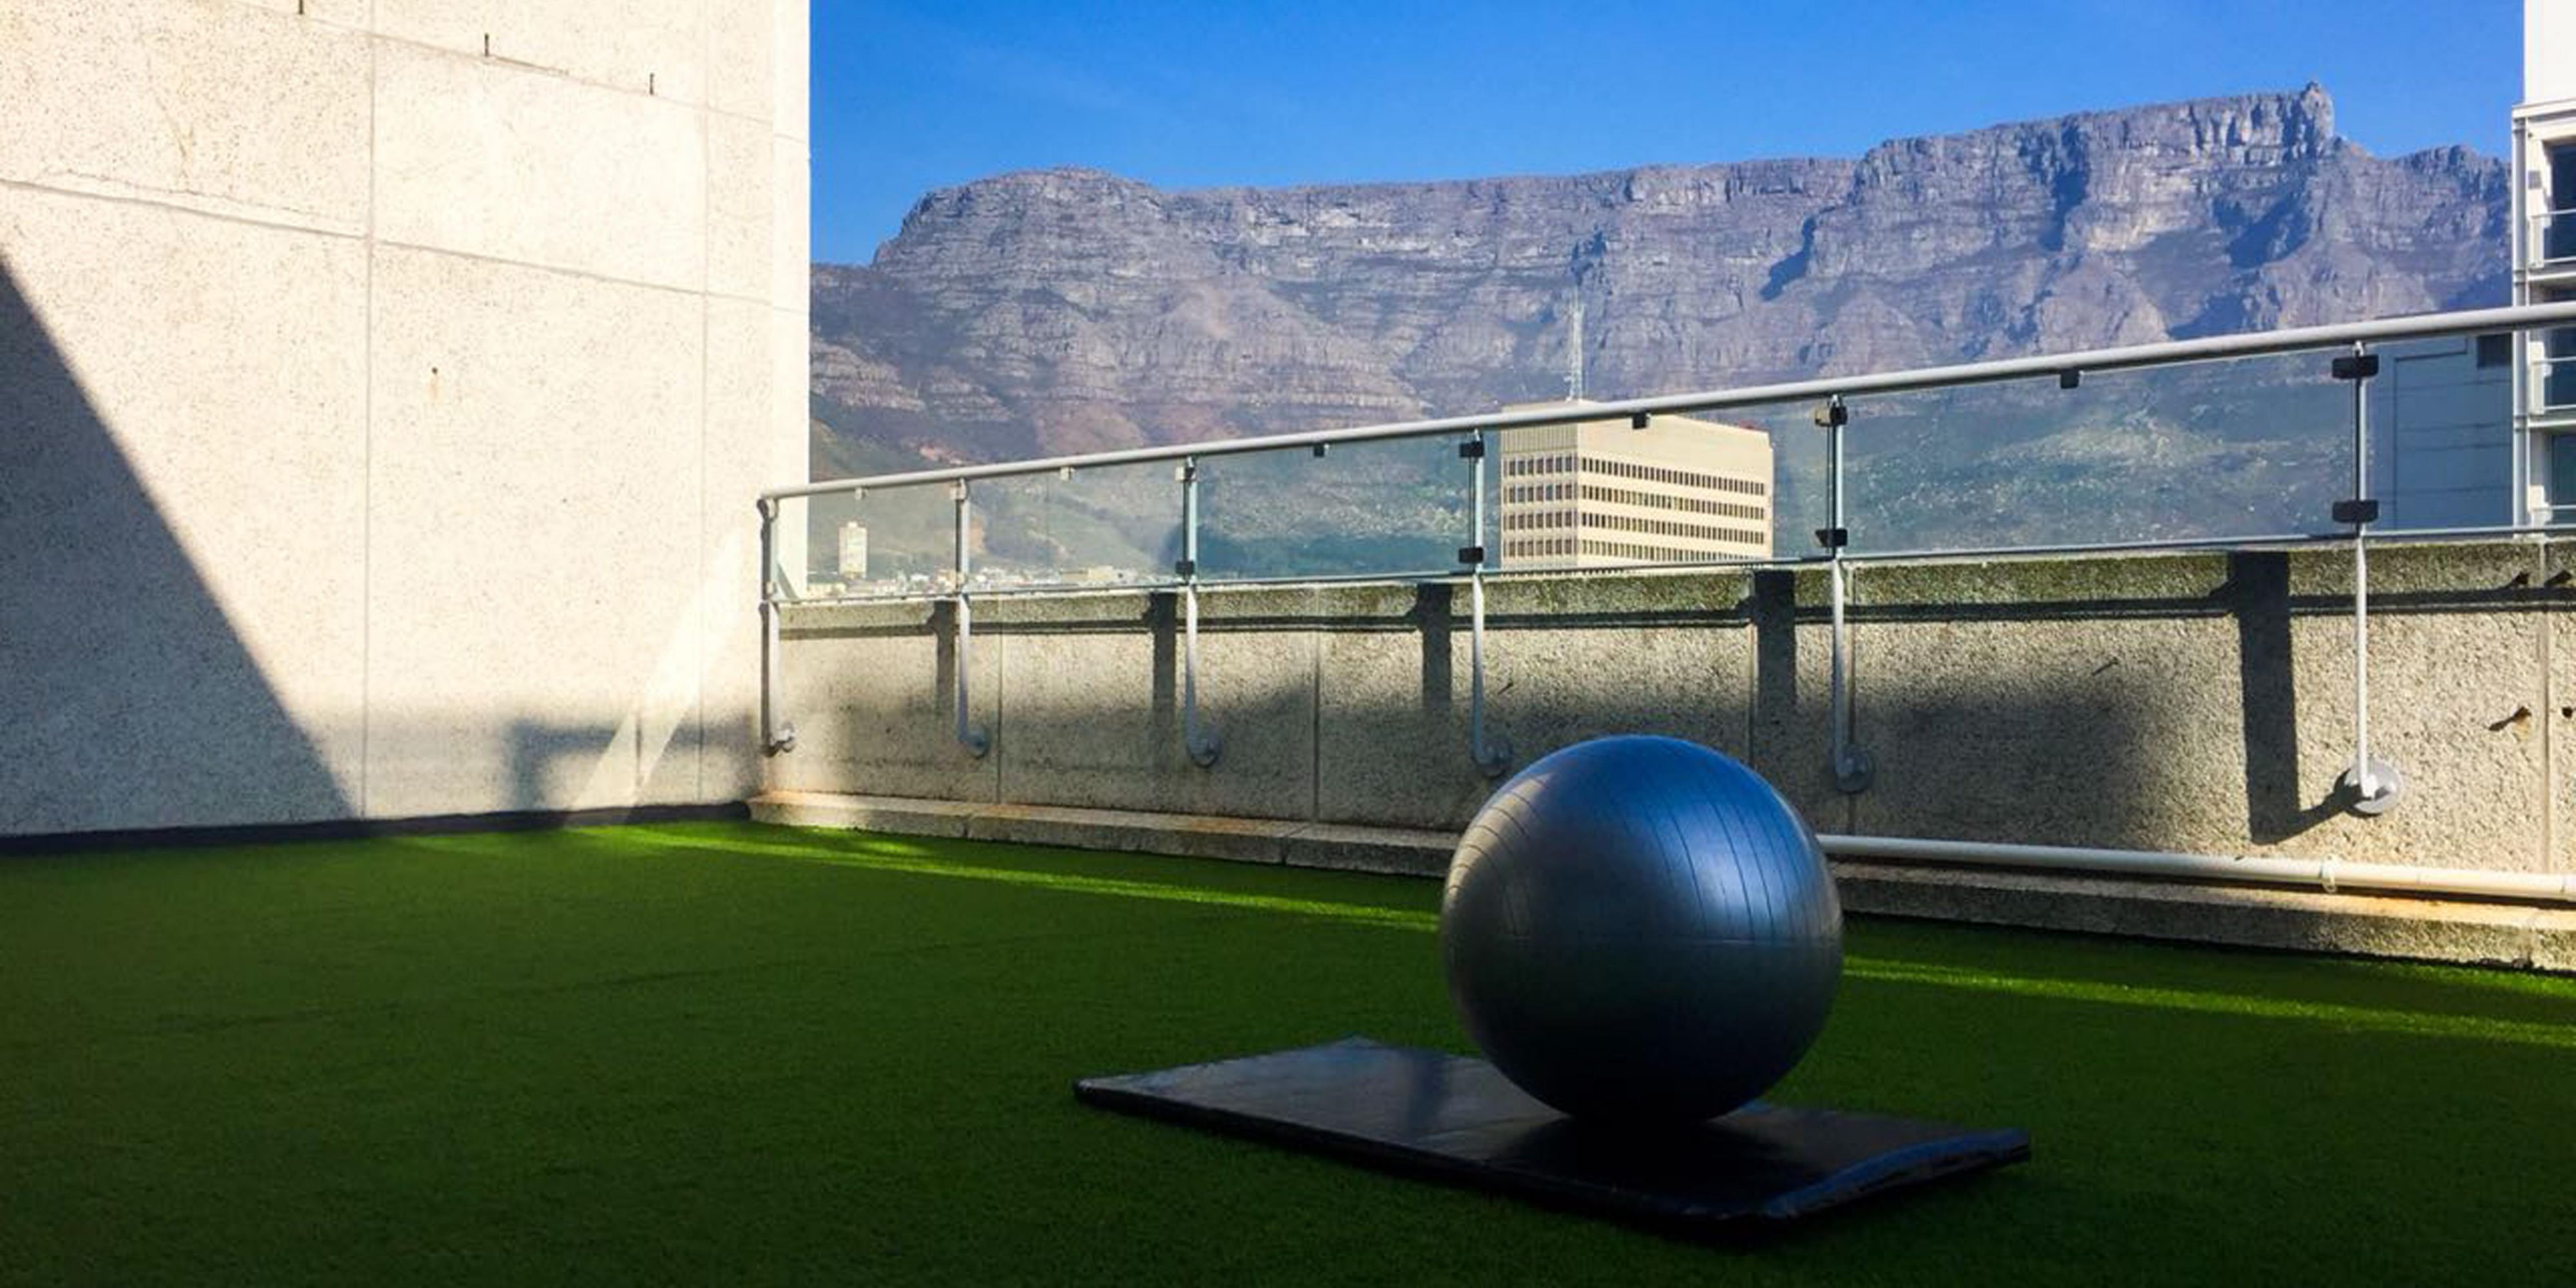 Our new Mini-Gym Terrace, overlooking Table Mountain, is a must-see. Help yourself to a post-workout tea or coffee whilst taking in the breathtaking views of Cape Town's most famous landmark.